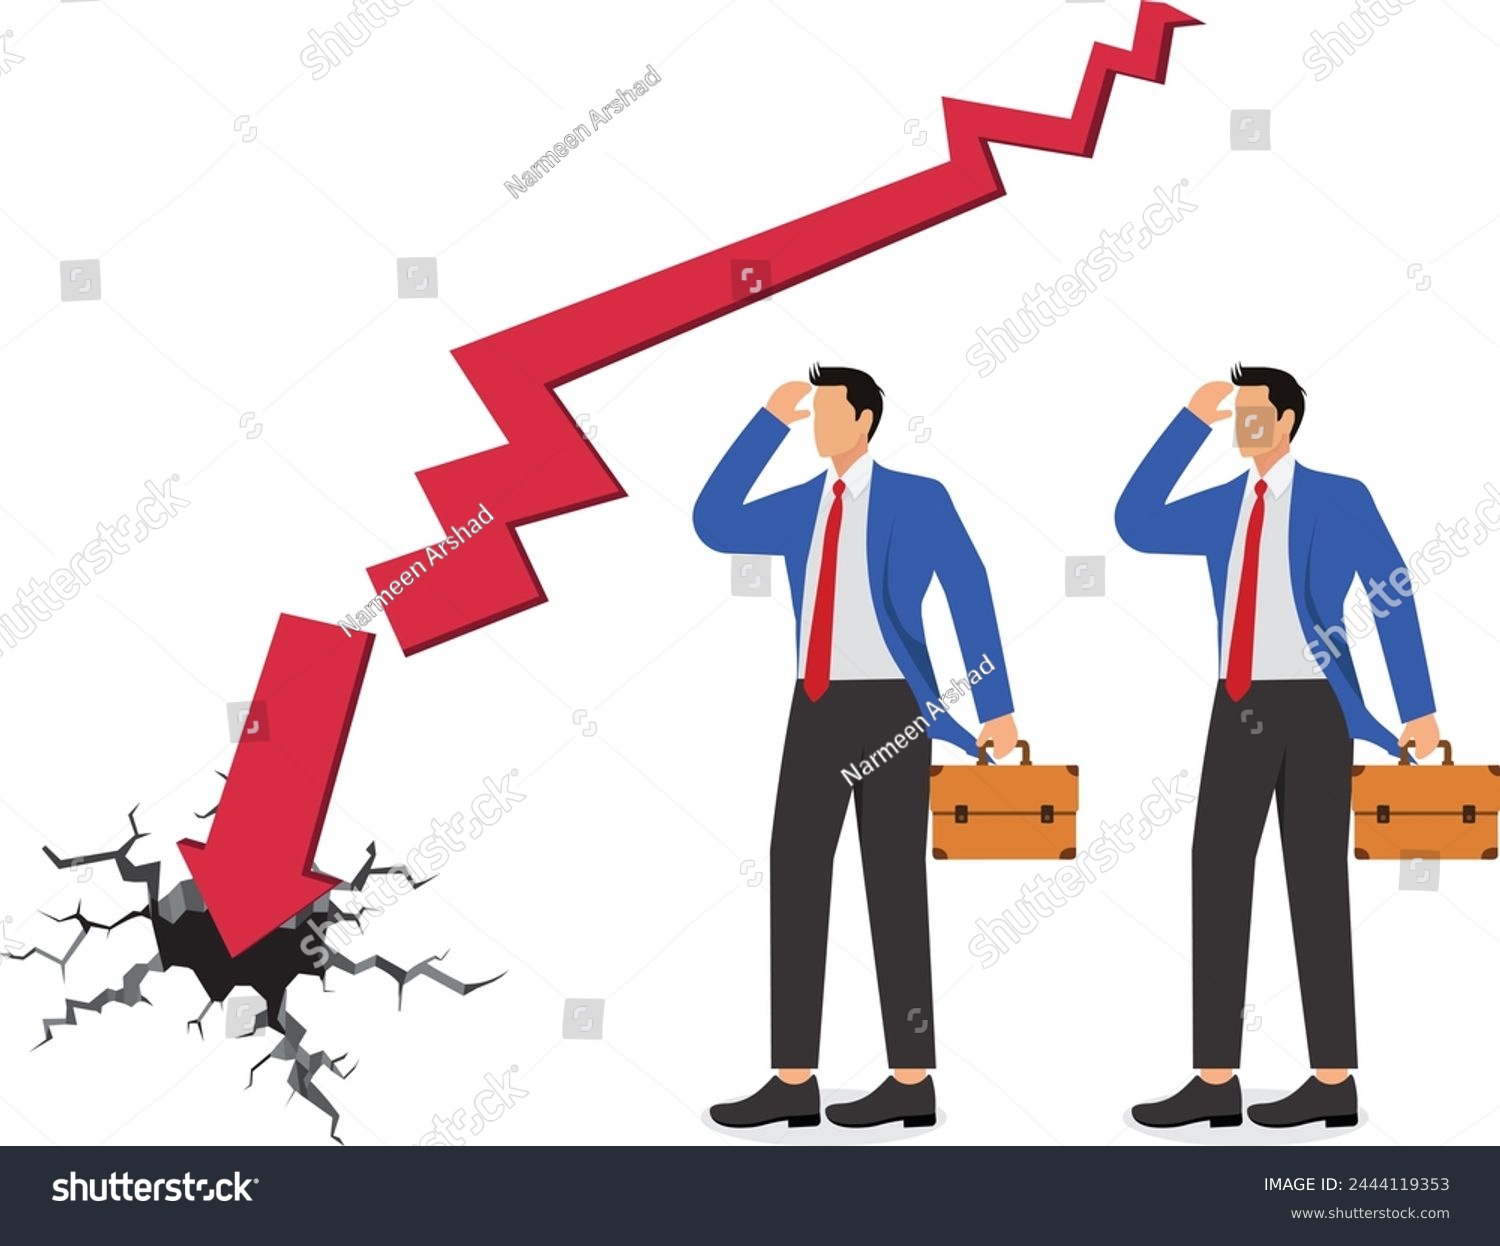 SVG of Broken negotiations, termination of a partnership or agreement, bad cooperation or poor business relations, two businessmen standing on either side of a broken arrow svg